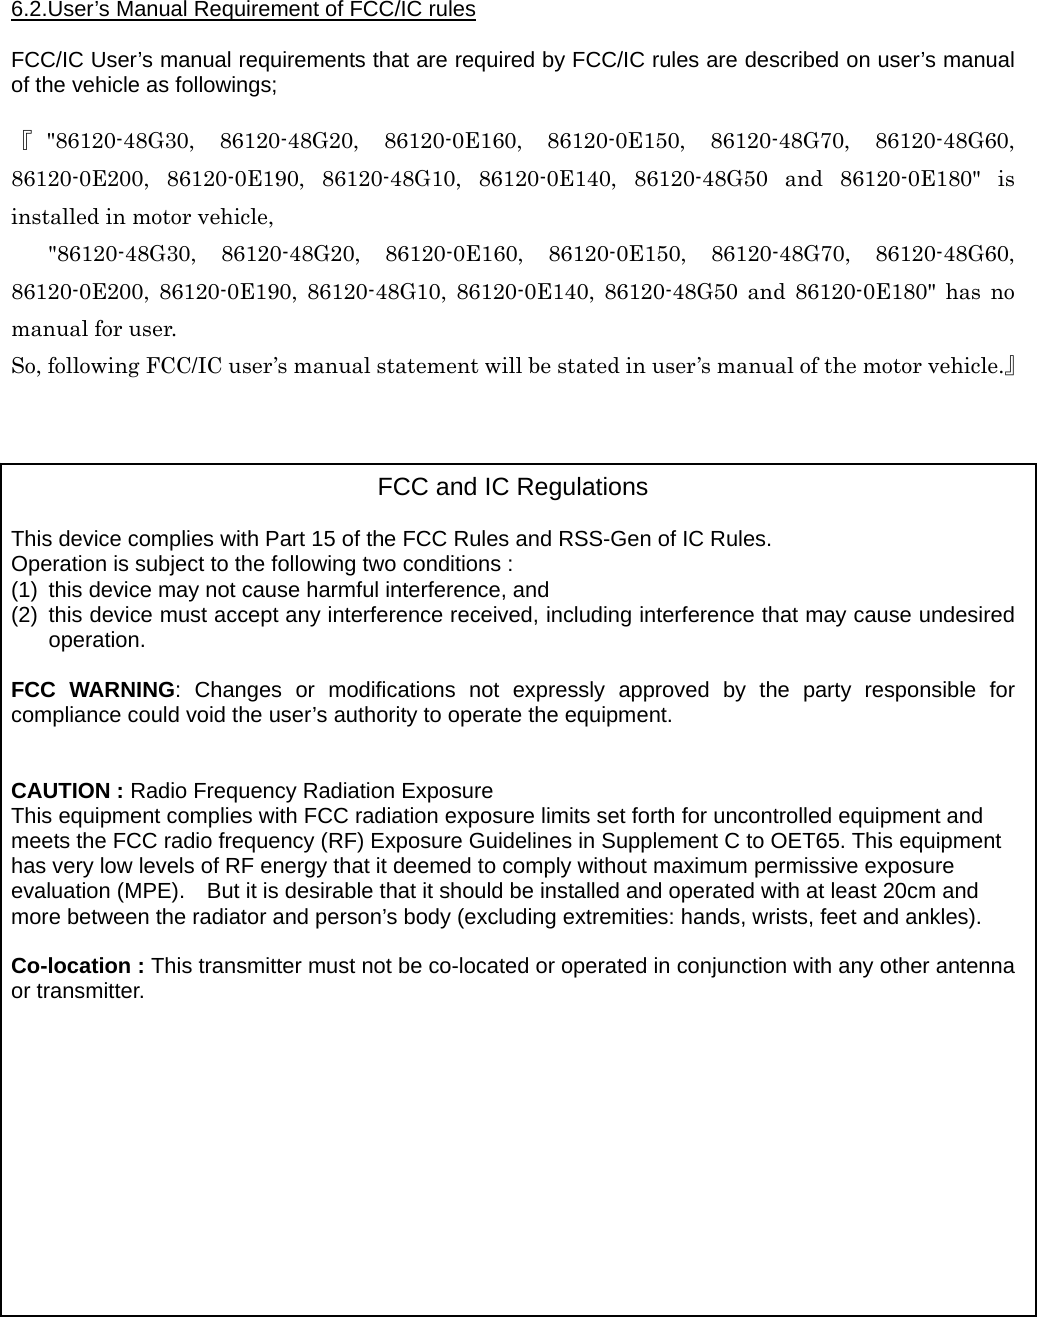  6.2.User’s Manual Requirement of FCC/IC rules  FCC/IC User’s manual requirements that are required by FCC/IC rules are described on user’s manual of the vehicle as followings;  『&quot;86120-48G30, 86120-48G20, 86120-0E160, 86120-0E150, 86120-48G70, 86120-48G60, 86120-0E200, 86120-0E190, 86120-48G10, 86120-0E140, 86120-48G50 and 86120-0E180&quot; is installed in motor vehicle,   &quot;86120-48G30, 86120-48G20, 86120-0E160, 86120-0E150, 86120-48G70, 86120-48G60, 86120-0E200, 86120-0E190, 86120-48G10, 86120-0E140, 86120-48G50 and 86120-0E180&quot; has no manual for user.   So, following FCC/IC user’s manual statement will be stated in user’s manual of the motor vehicle.』    FCC and IC Regulations  This device complies with Part 15 of the FCC Rules and RSS-Gen of IC Rules. Operation is subject to the following two conditions : (1)  this device may not cause harmful interference, and (2)  this device must accept any interference received, including interference that may cause undesired operation.  FCC WARNING: Changes or modifications not expressly approved by the party responsible for compliance could void the user’s authority to operate the equipment.   CAUTION : Radio Frequency Radiation Exposure This equipment complies with FCC radiation exposure limits set forth for uncontrolled equipment and meets the FCC radio frequency (RF) Exposure Guidelines in Supplement C to OET65. This equipment has very low levels of RF energy that it deemed to comply without maximum permissive exposure evaluation (MPE).    But it is desirable that it should be installed and operated with at least 20cm and more between the radiator and person’s body (excluding extremities: hands, wrists, feet and ankles).  Co-location : This transmitter must not be co-located or operated in conjunction with any other antenna or transmitter.            